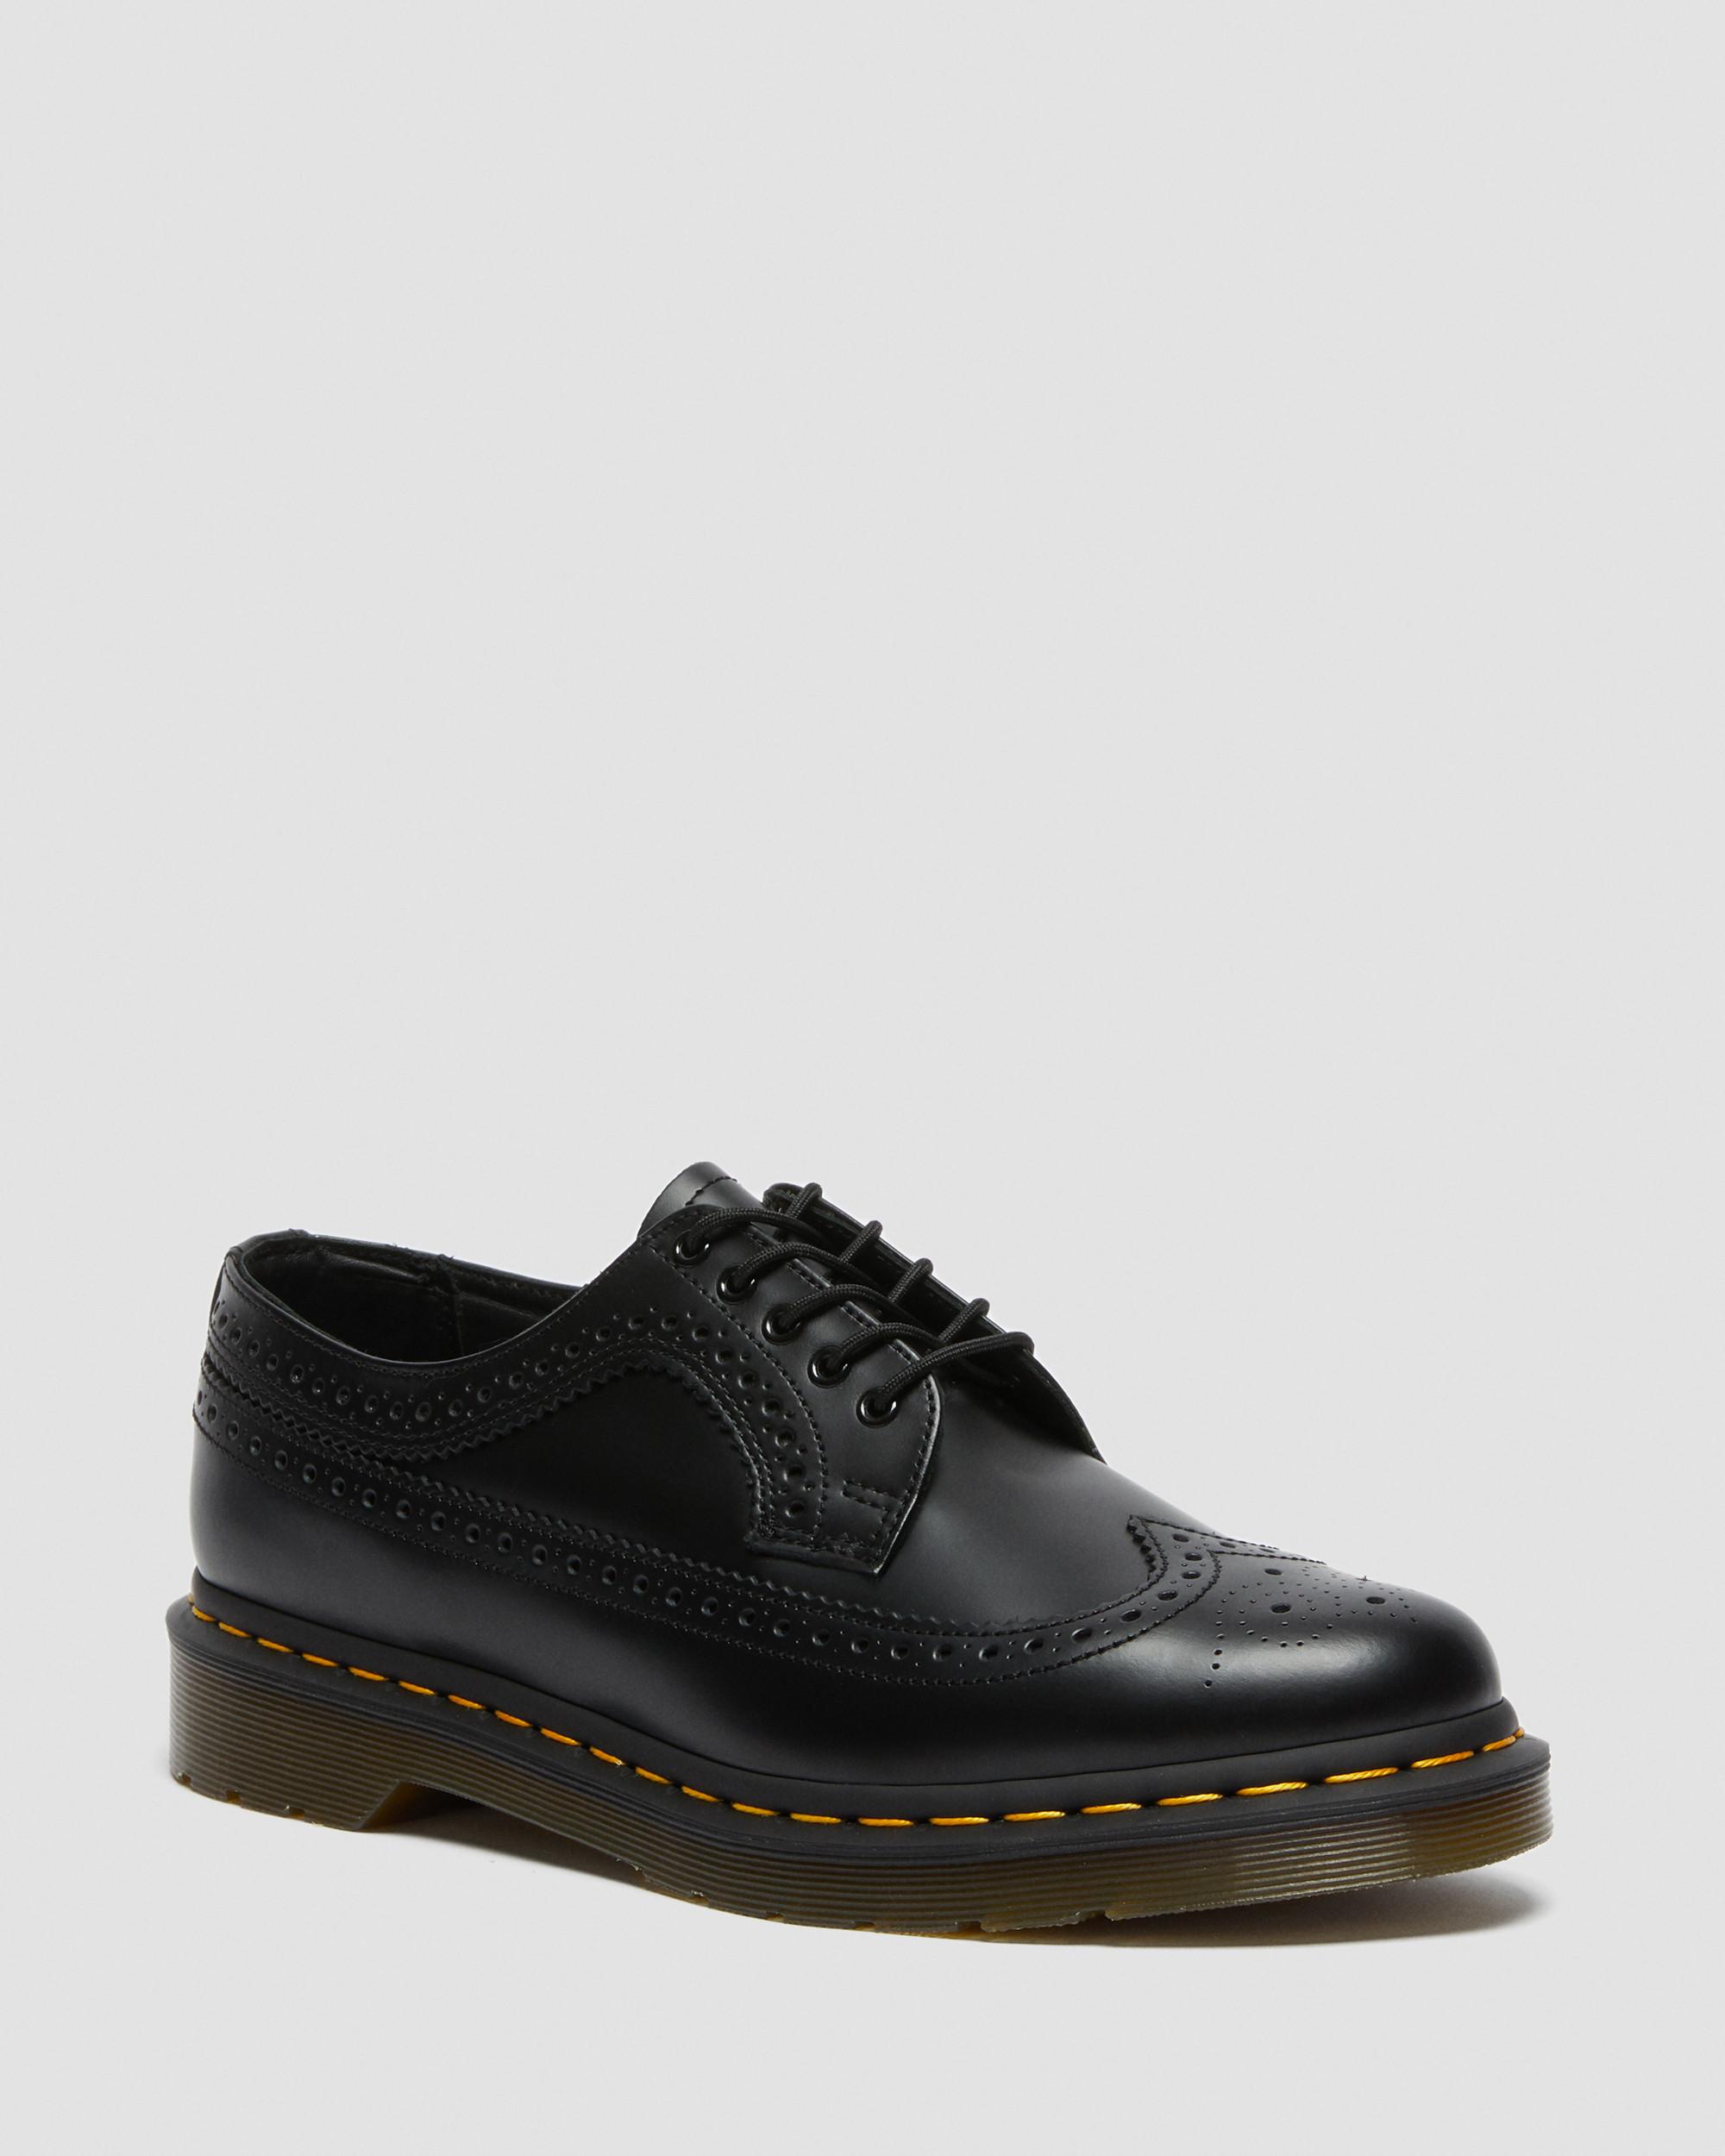 3989 Smooth Leather Brogue Shoes in Black | Dr. Martens